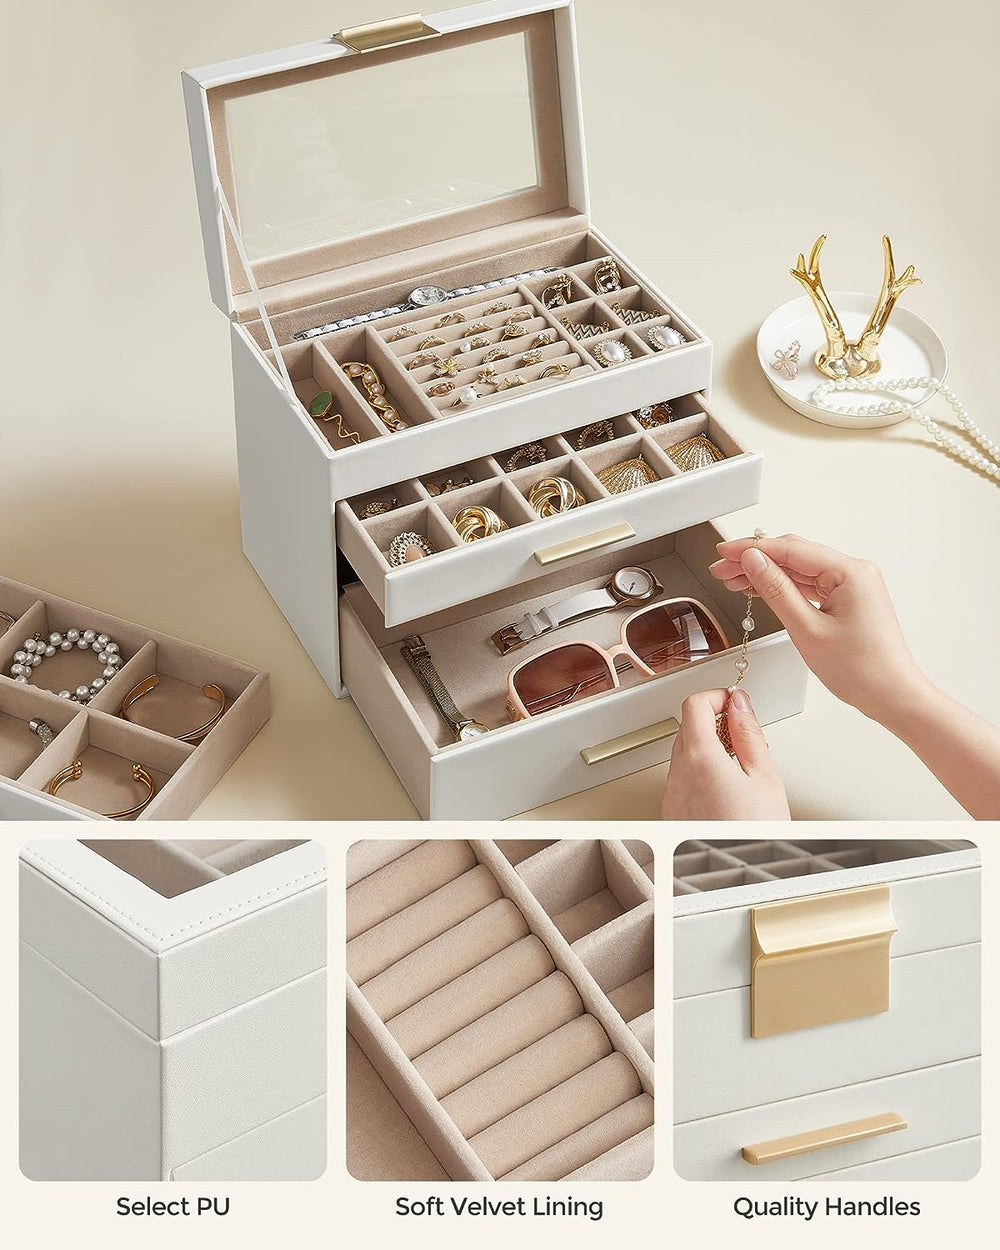 SONGMICS 4-Layer Jewelry Box with 3 Drawers and Glass Lid Cloud White and Gold